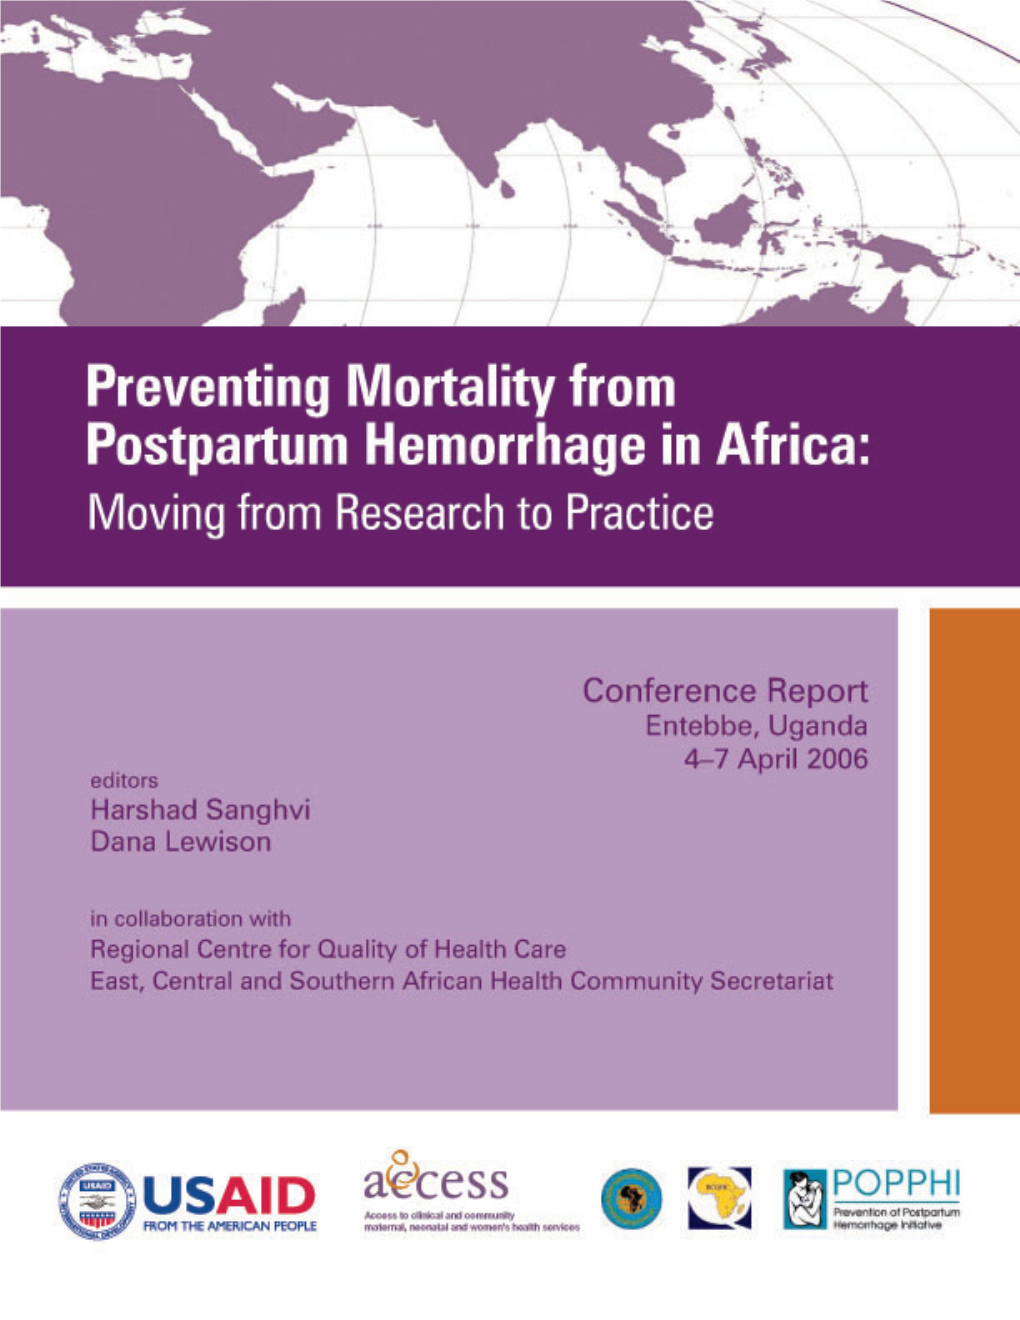 Preventing Mortality from Postpartum Hemorrhage in Africa: Moving from Research to Practice